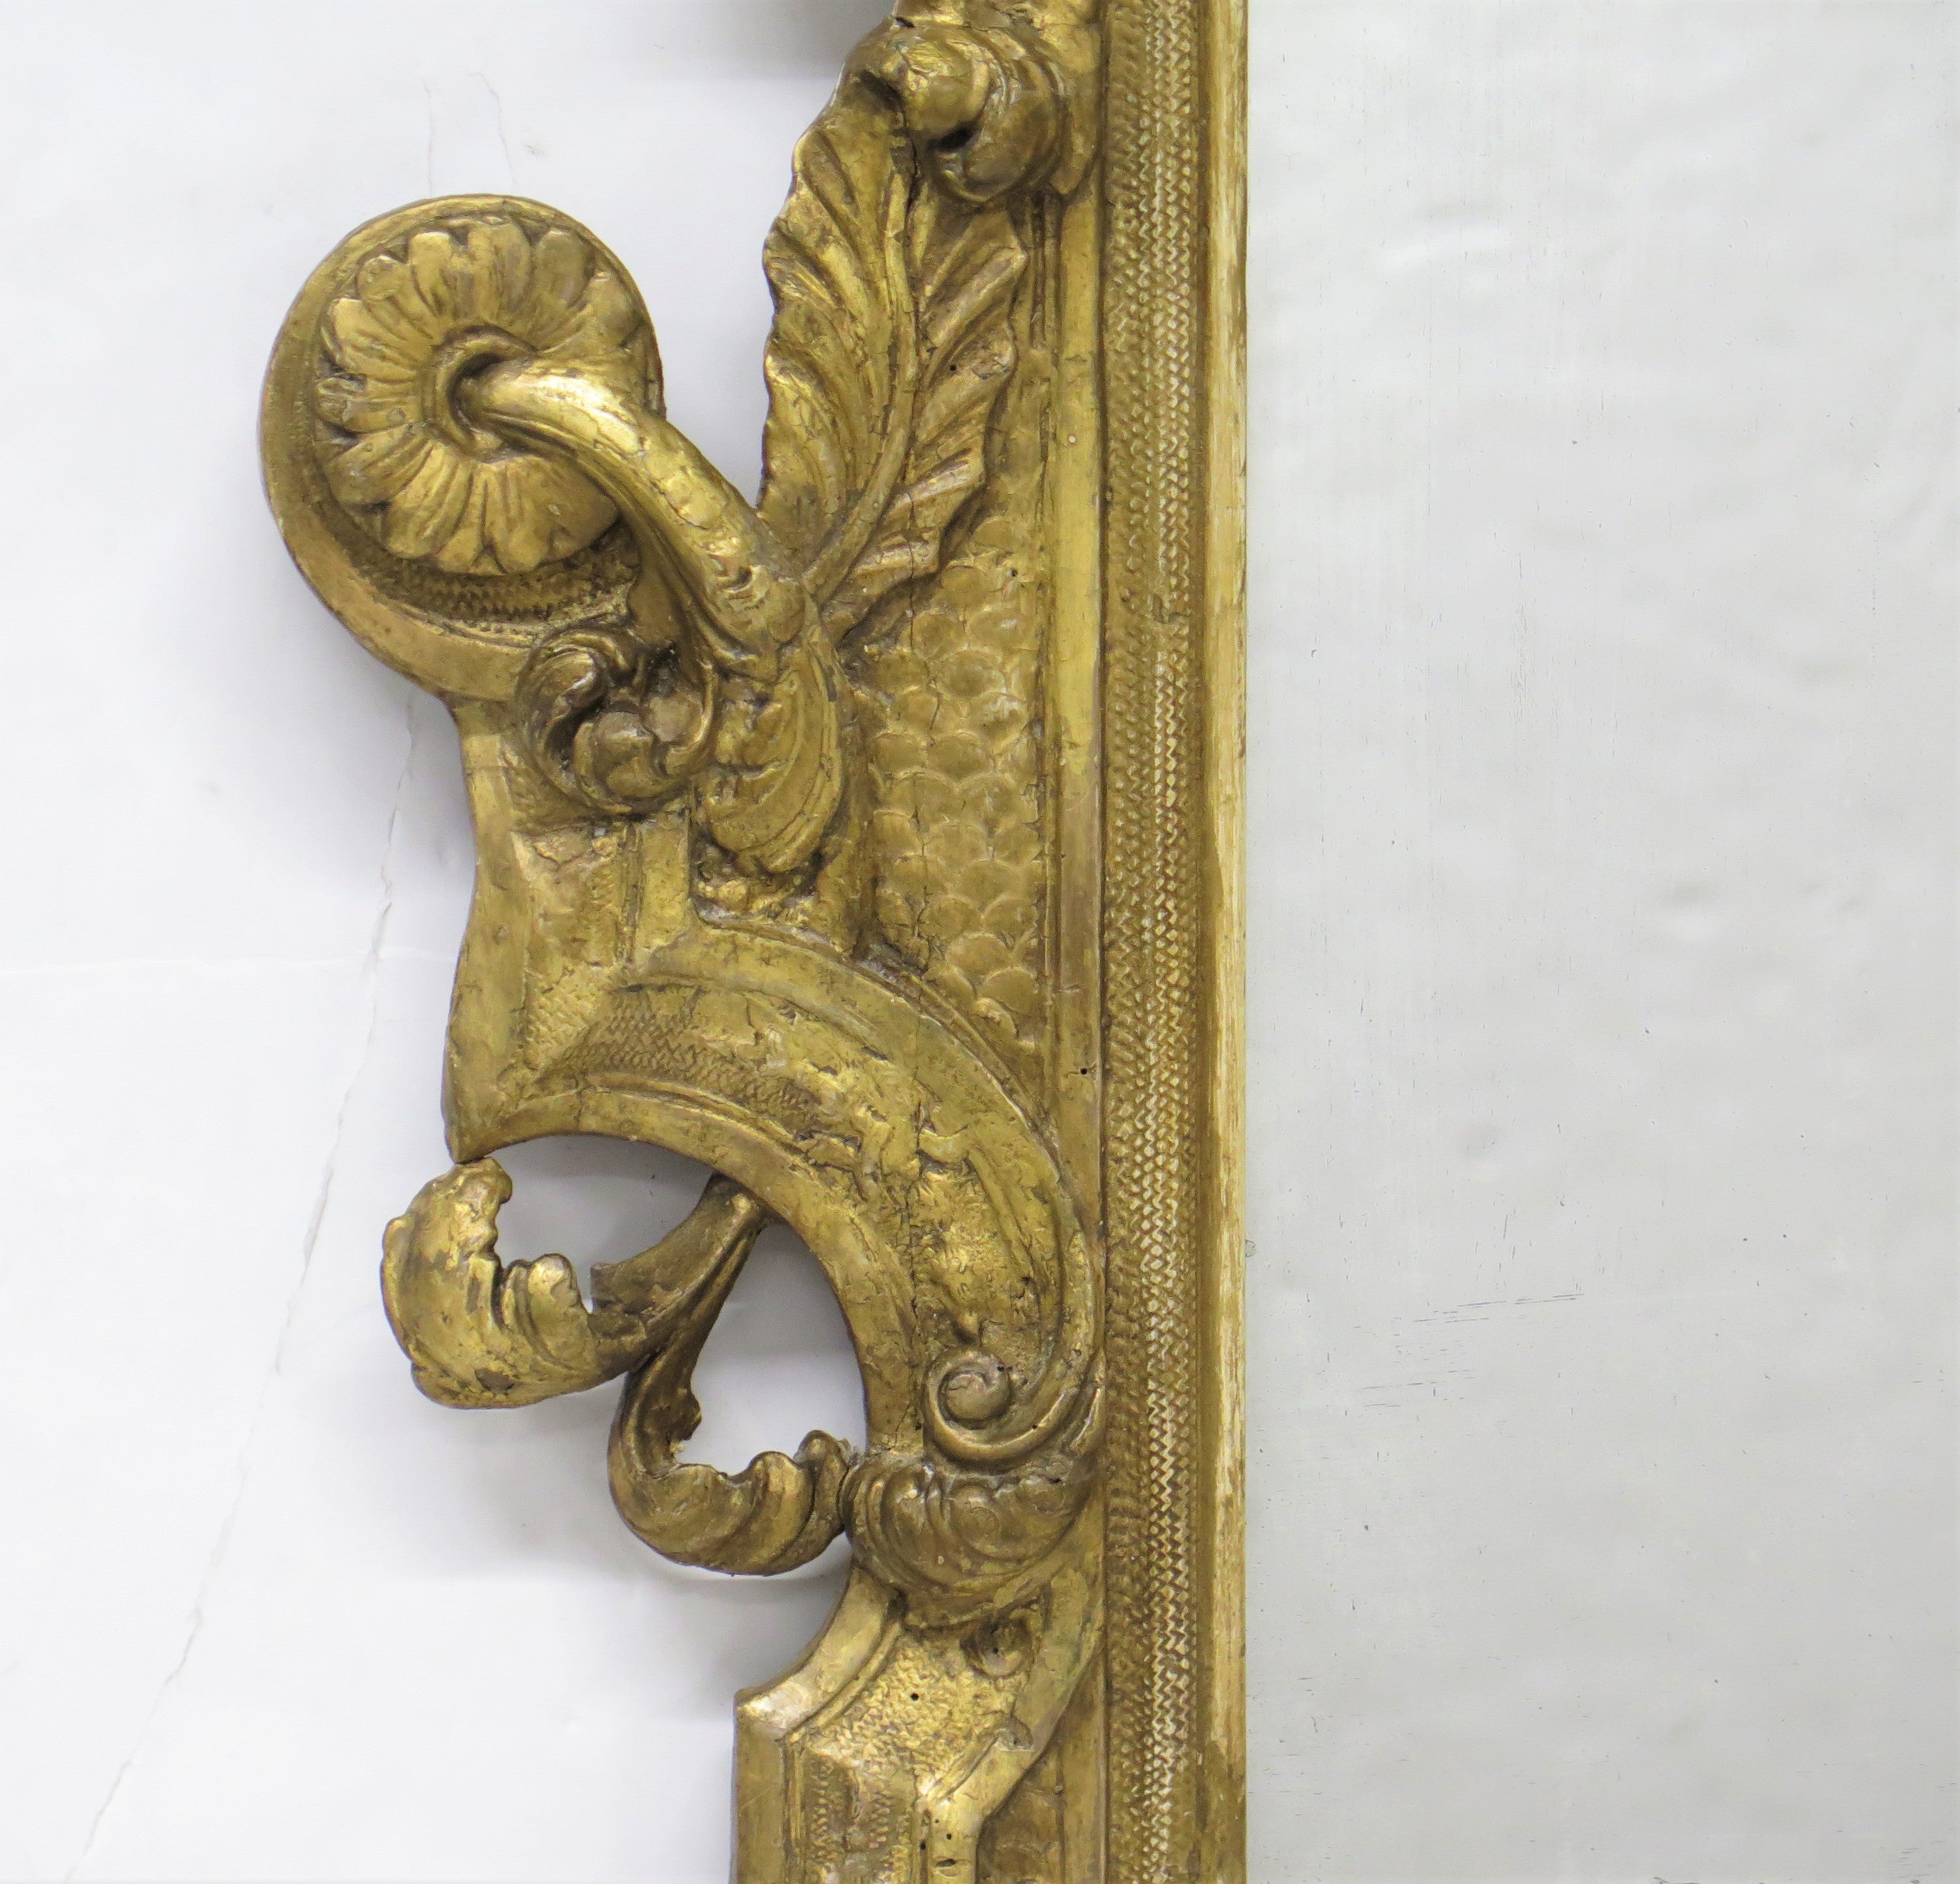 Italian Looking Glass/mirror, Carved and Gilded